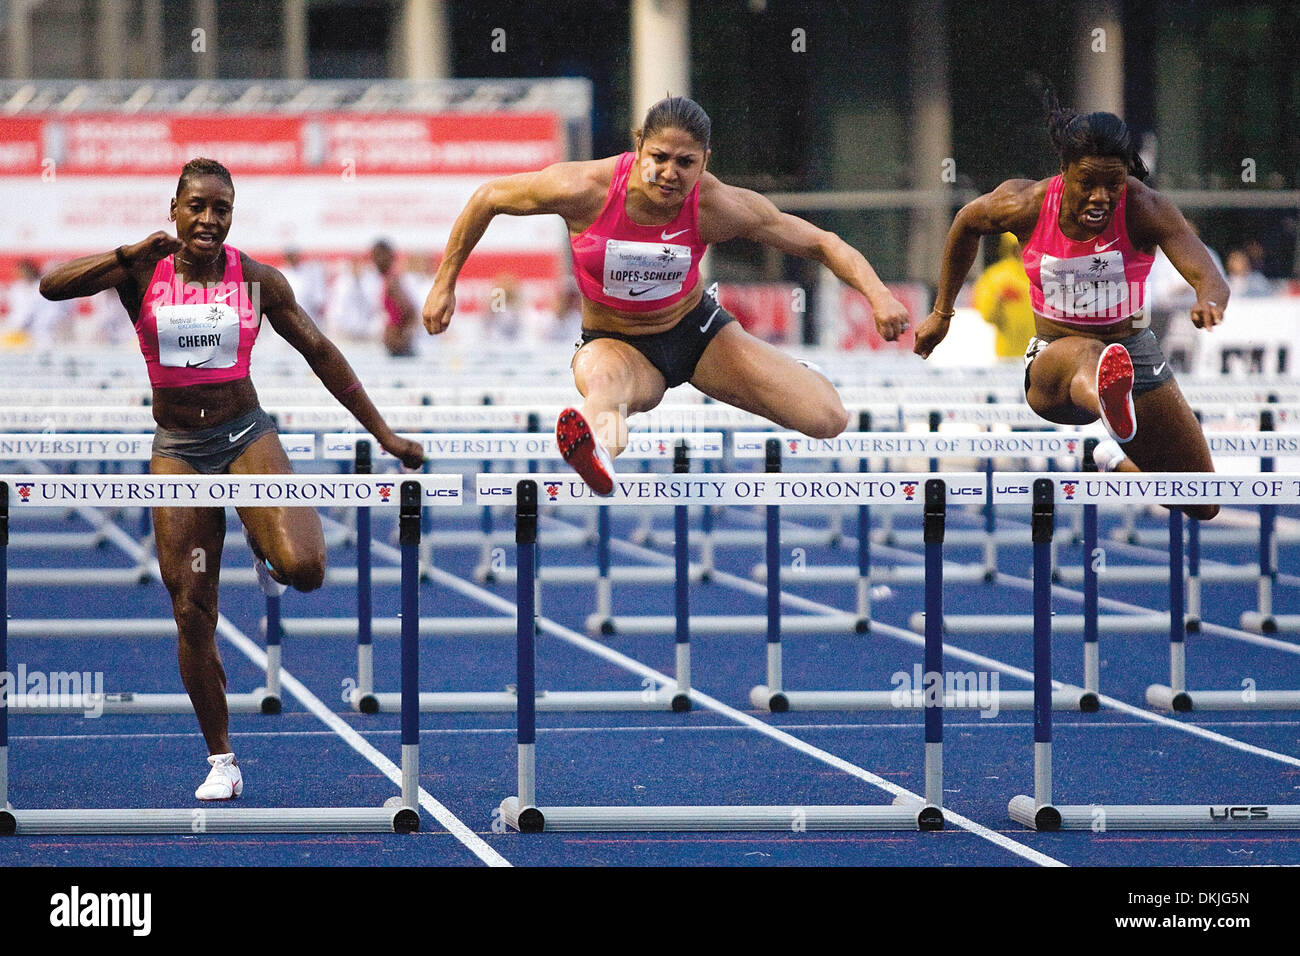 June 11, 2009 - Toronto, Ontario, Canada - 11 June 2009:  Priscilla Lopes-Schleip of Canada (center), edged out fellow teammate Perdita Felicien (right) in the Women's 100 Meter Hurdles at University of Toronto's Festival of Excellence. Lopes-Schleip completed her sprint at a time of 12.86 -  beating Felicien  by a margin of 2 one-hundredths of a second. (Credit Image: © Southcreek Stock Photo